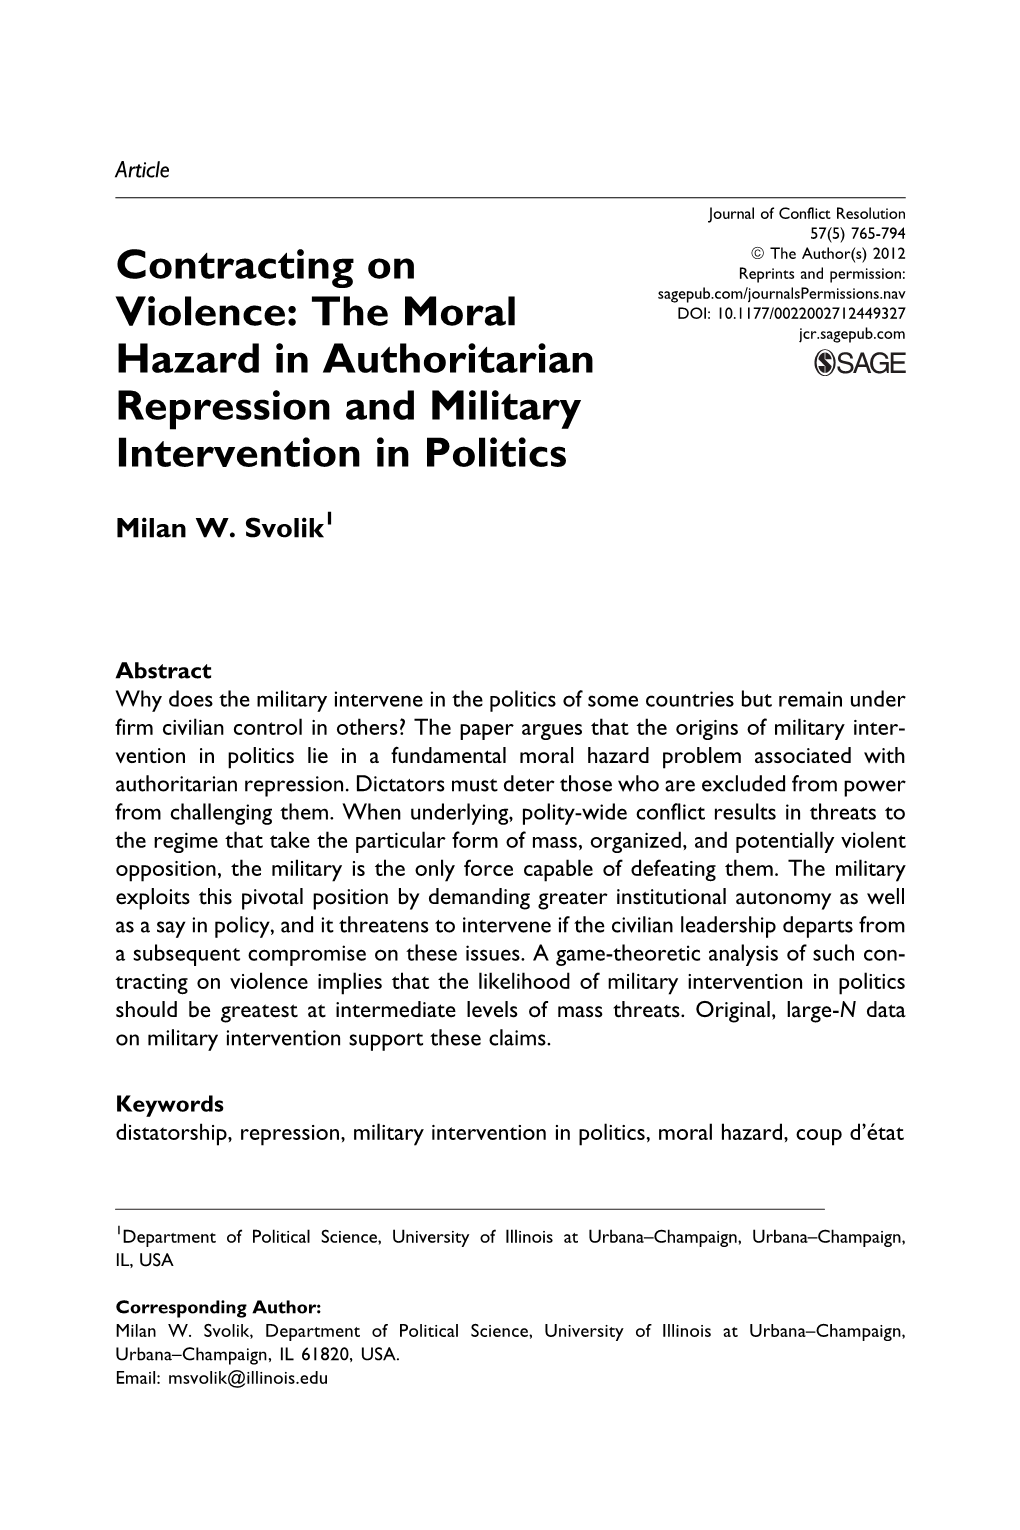 Contracting on Violence: the Moral Hazard in Authoritarian Repression